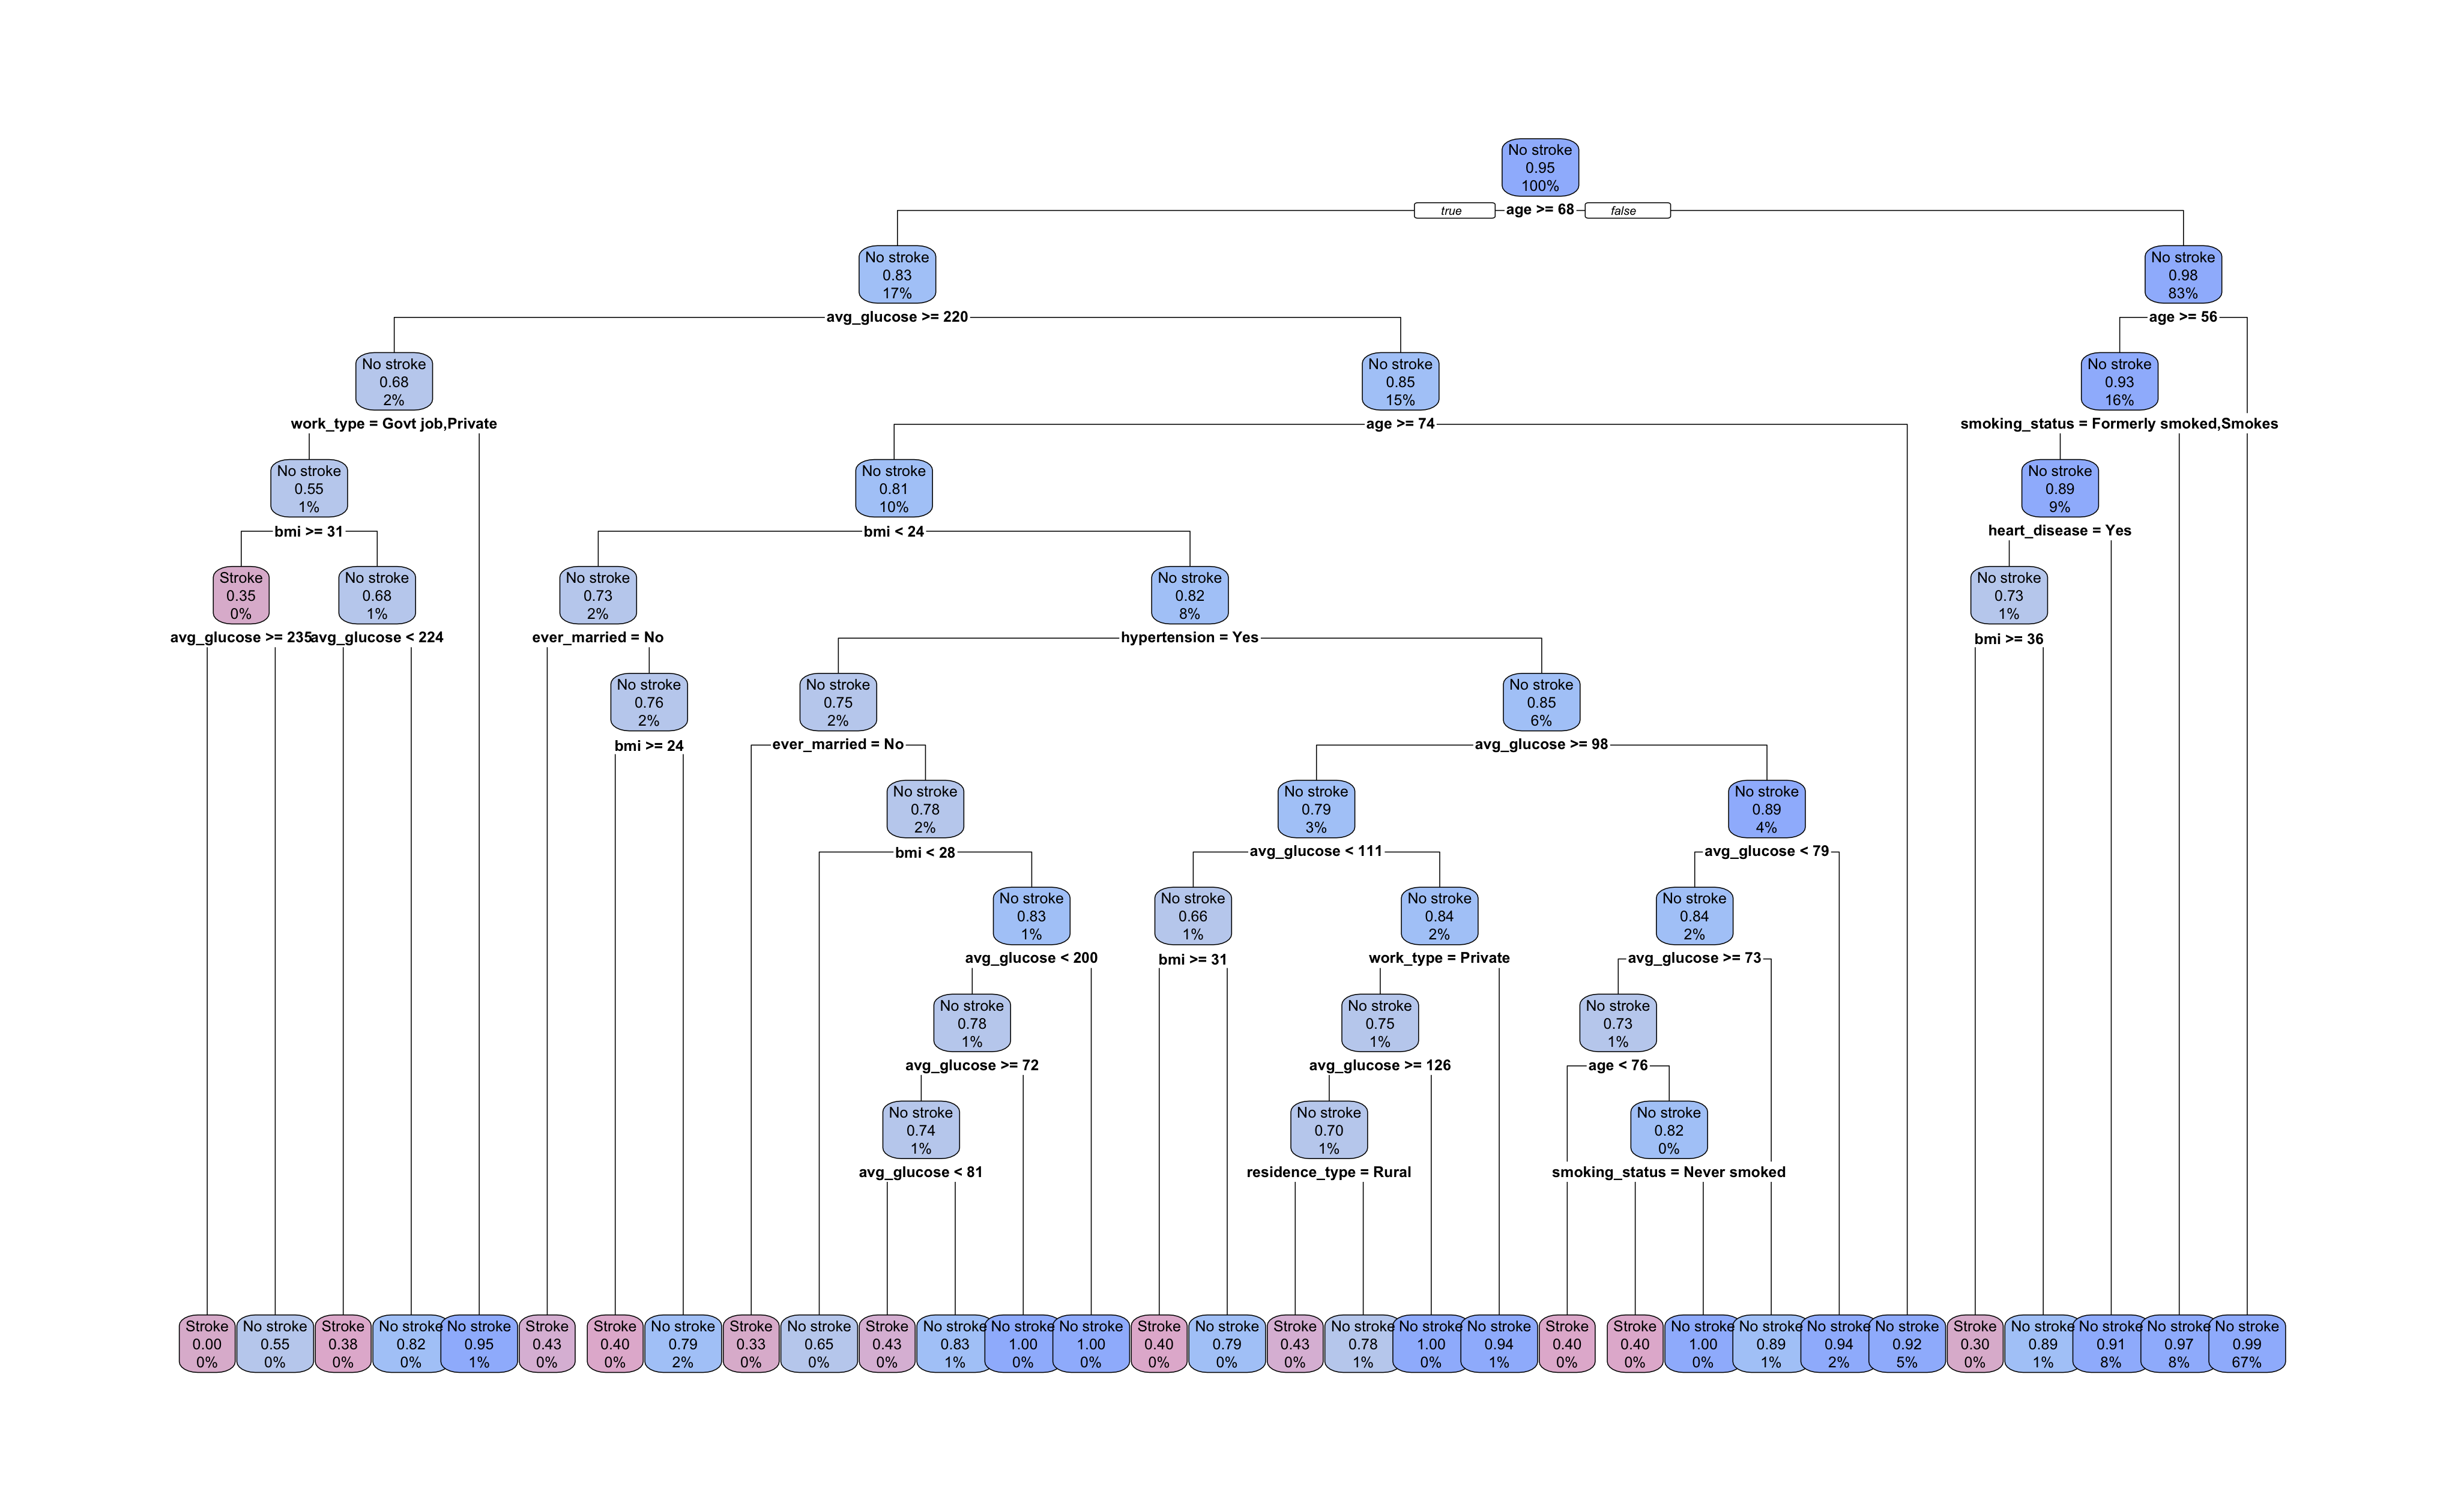 Diagram of decision tree describing the unpruned decision tree model for predicting the outcome of a stroke. The tree has a depth of 10 splits and 31 terminal nodes. Stroke was predicted for 11 of the terminal nodes. The most recurrent predictors involved in primary decision splits are age, BMI and average glucose level.